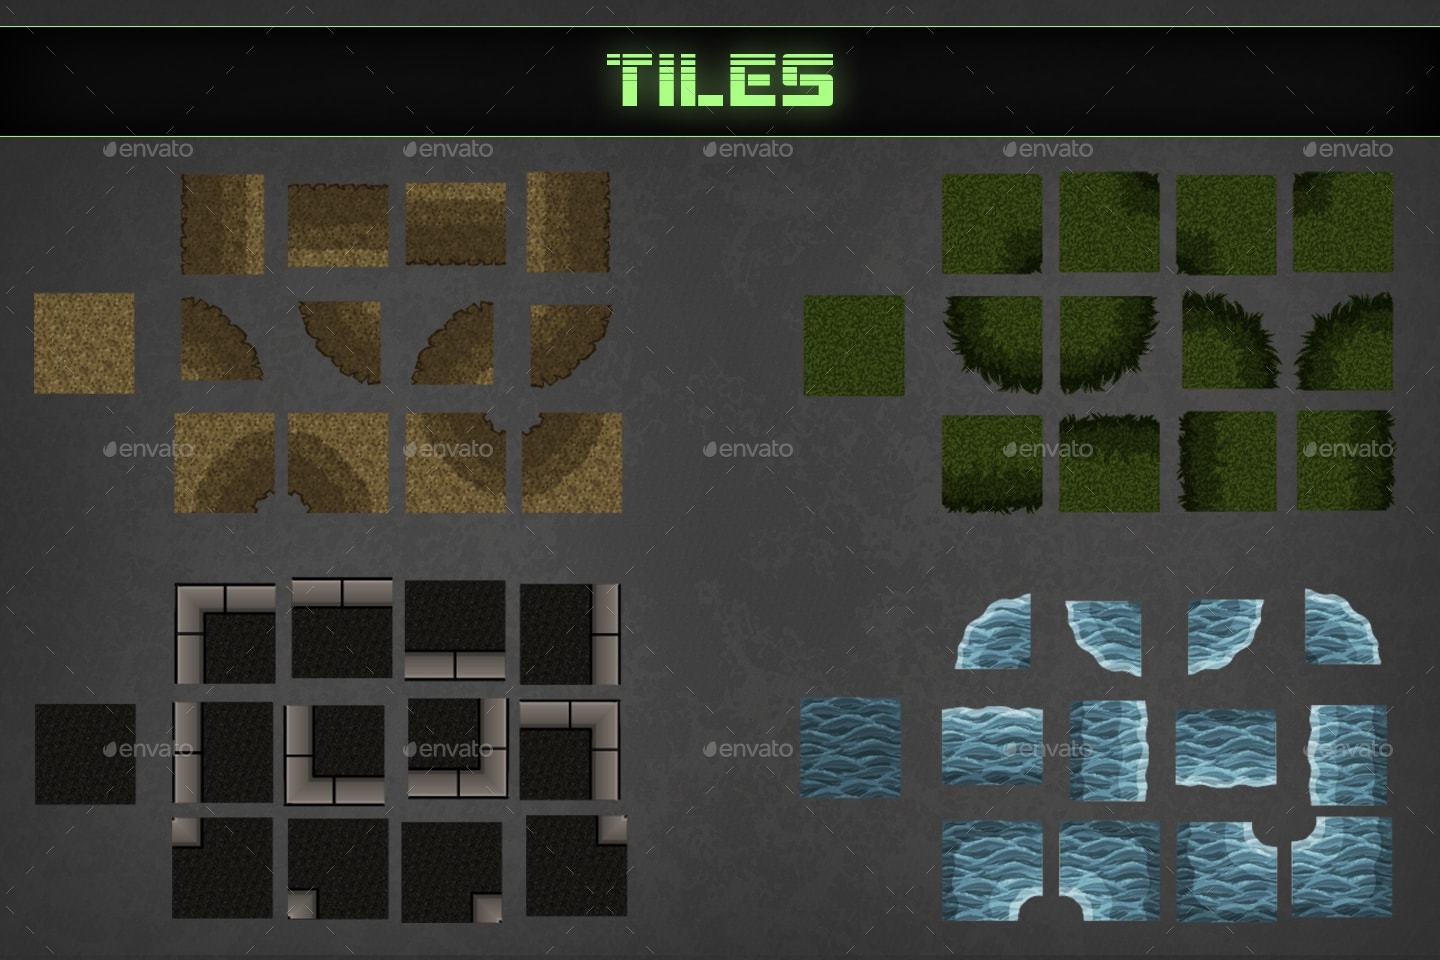 TopDown Shooter Tileset, Game Assets GraphicRiver